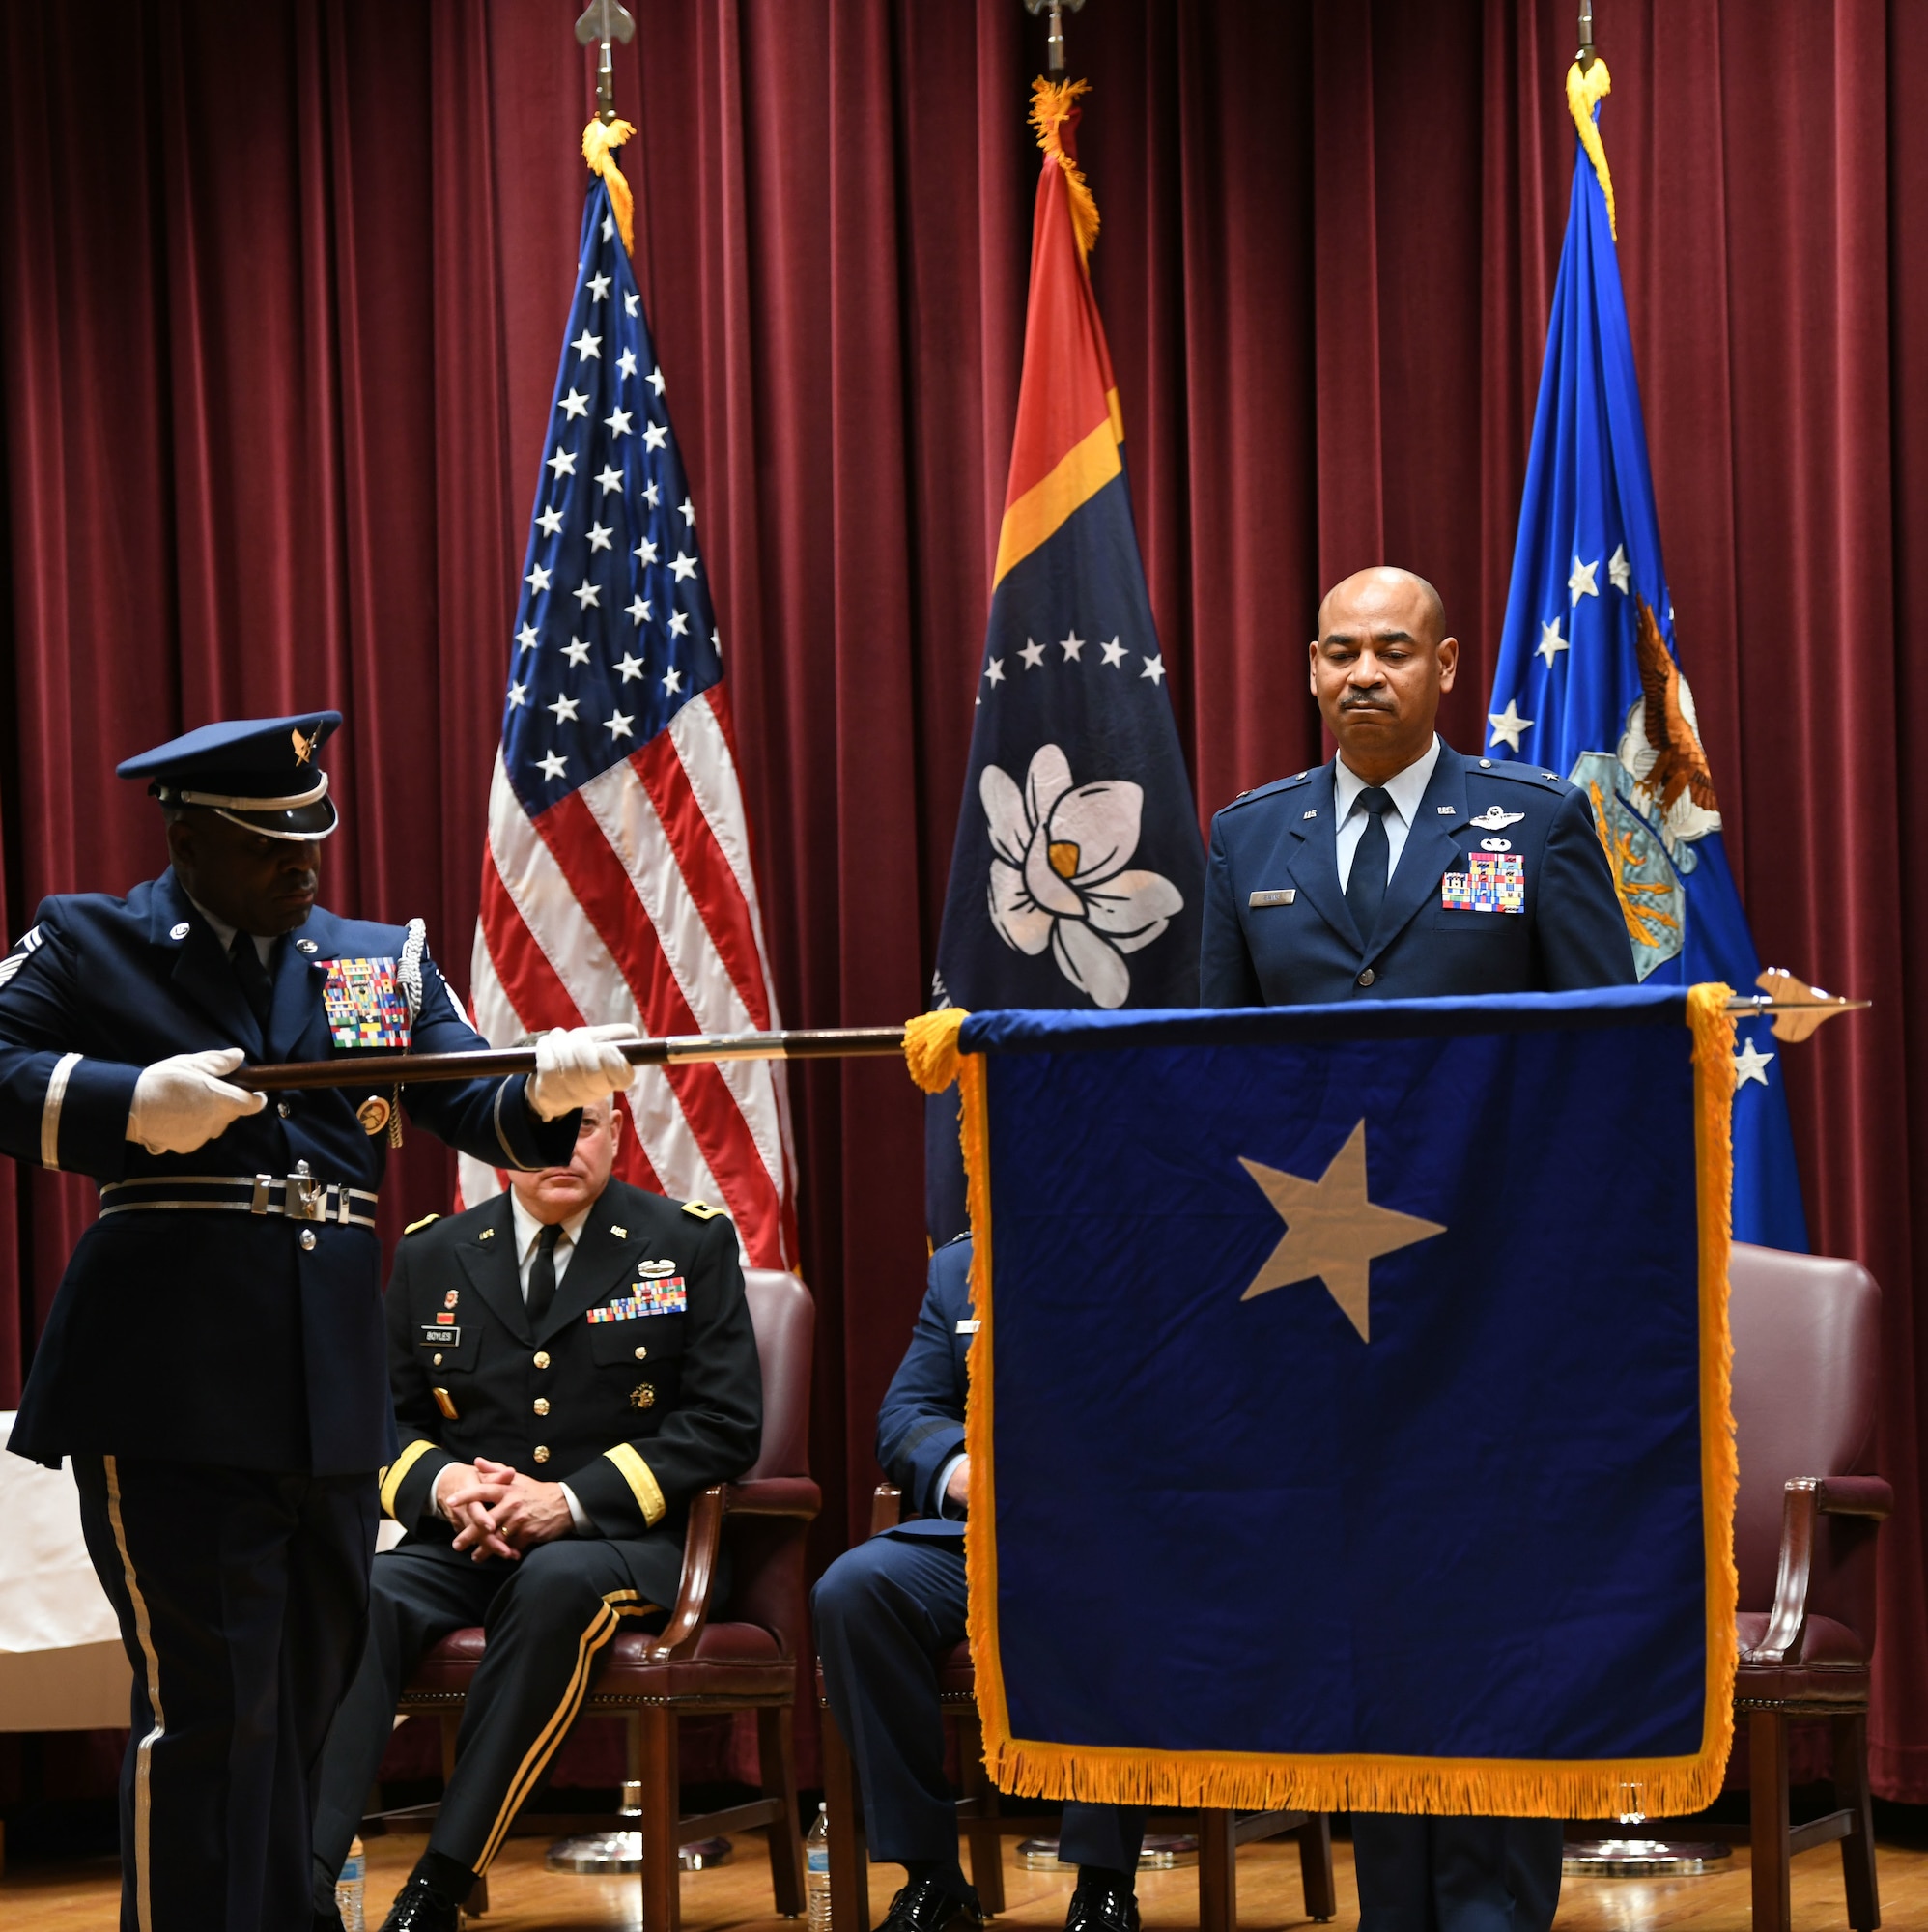 Brig. Gen. Edward H. Evans, Jr., chief of staff, Mississippi Air National Guard, and the first Mississippi Air National Guard member to be promoted to the rank of brigadier general, is presented with his personal flag during his promotion ceremony at Mississippi National Guard Joint Force Headquarters, Jackson, Mississippi, March 5, 2022.